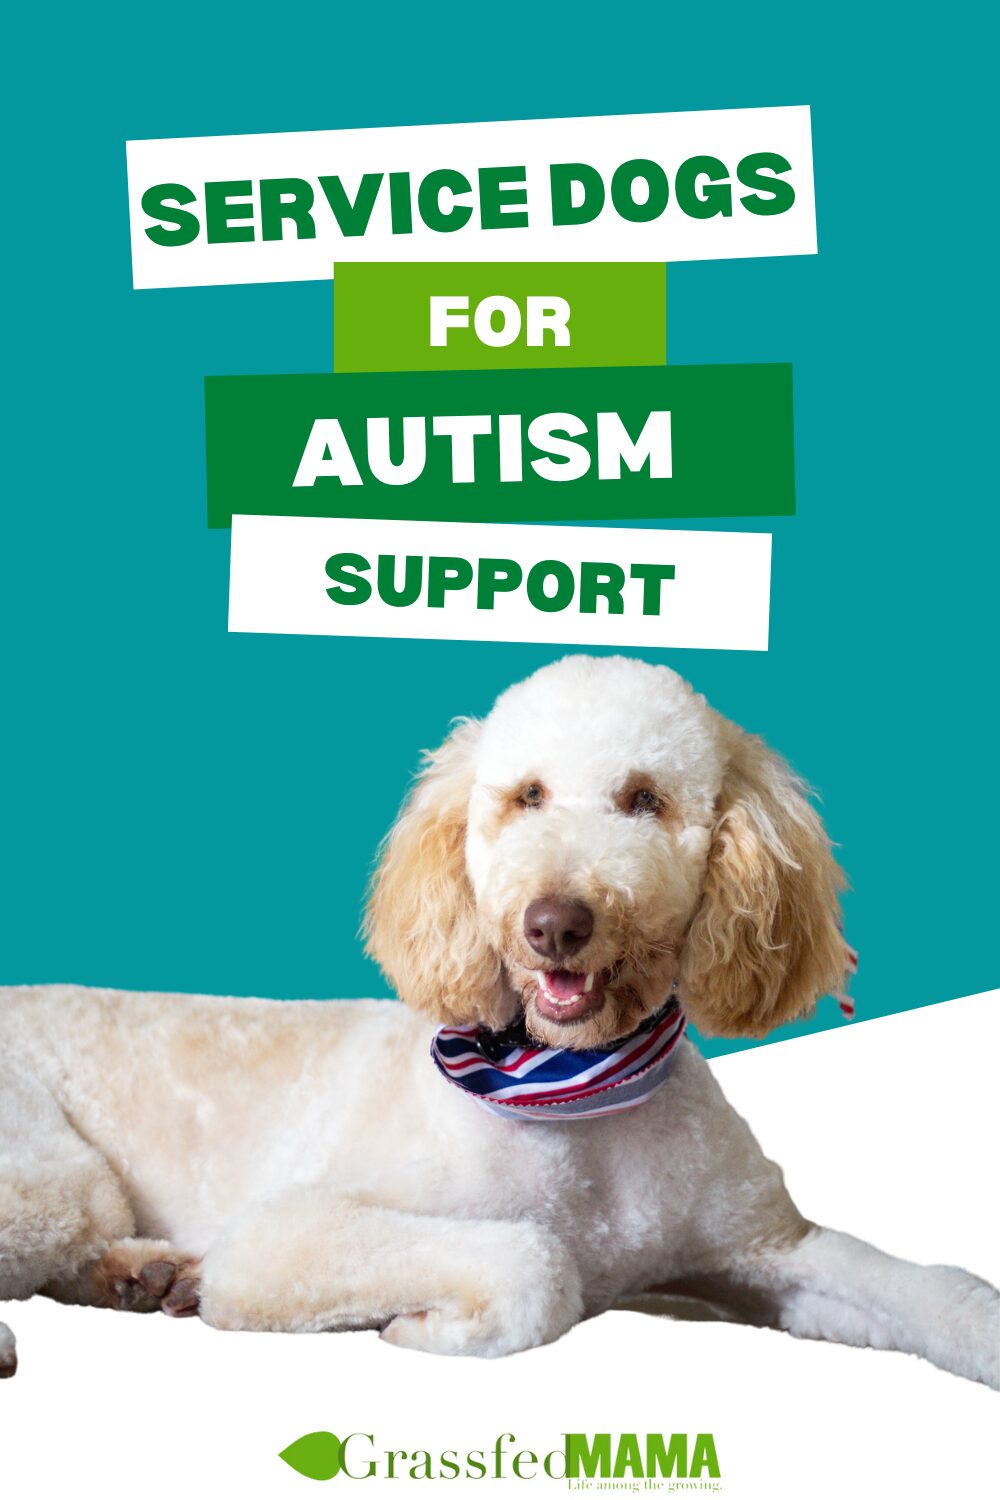 Service Dogs for Autism Support